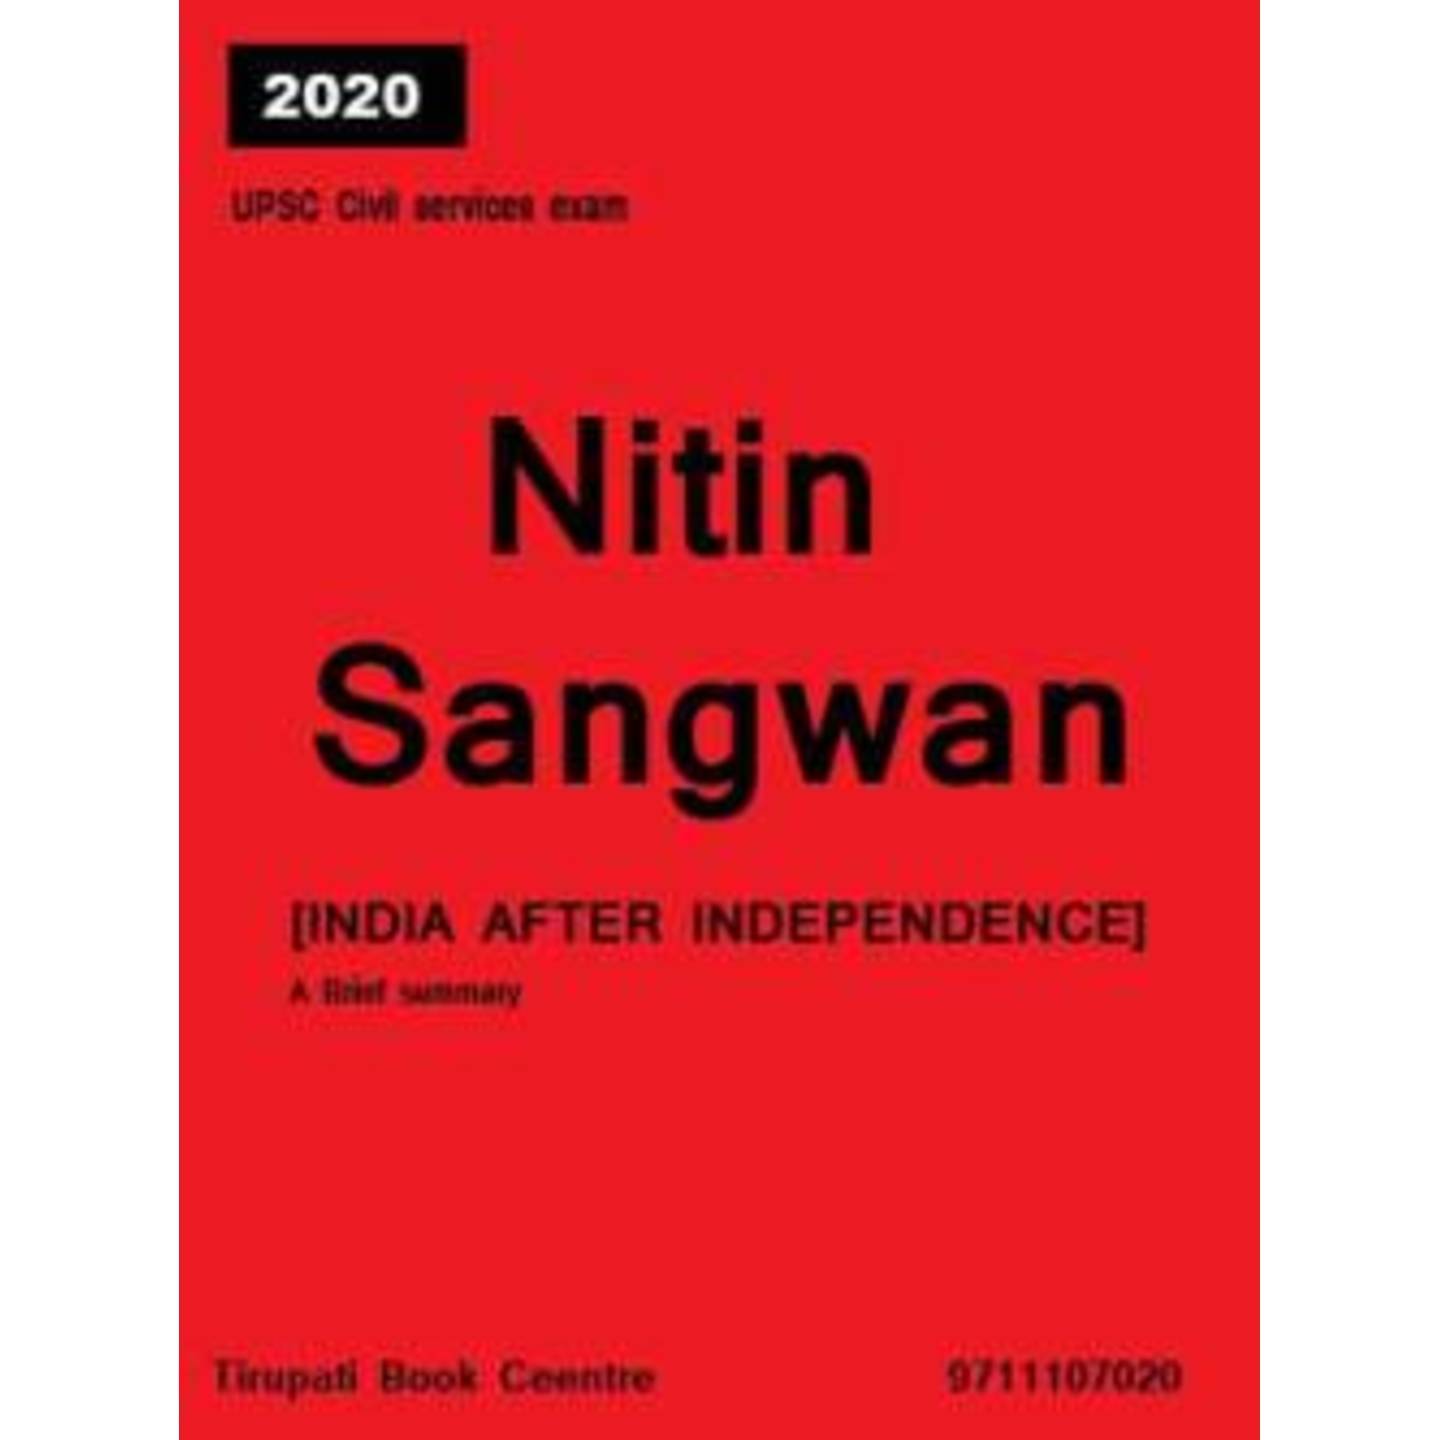 NITIN SANGWAN - STUDY MATERIAL 8 BOOKLETS - ECONOMY, ENVIRONMENT, GEOGRAPHY, WORLD HISTORY, MODERN HISTORY, INDIA AFTER INDEPENDENCE, ART AND CULTURE & SCIENCE TECH.